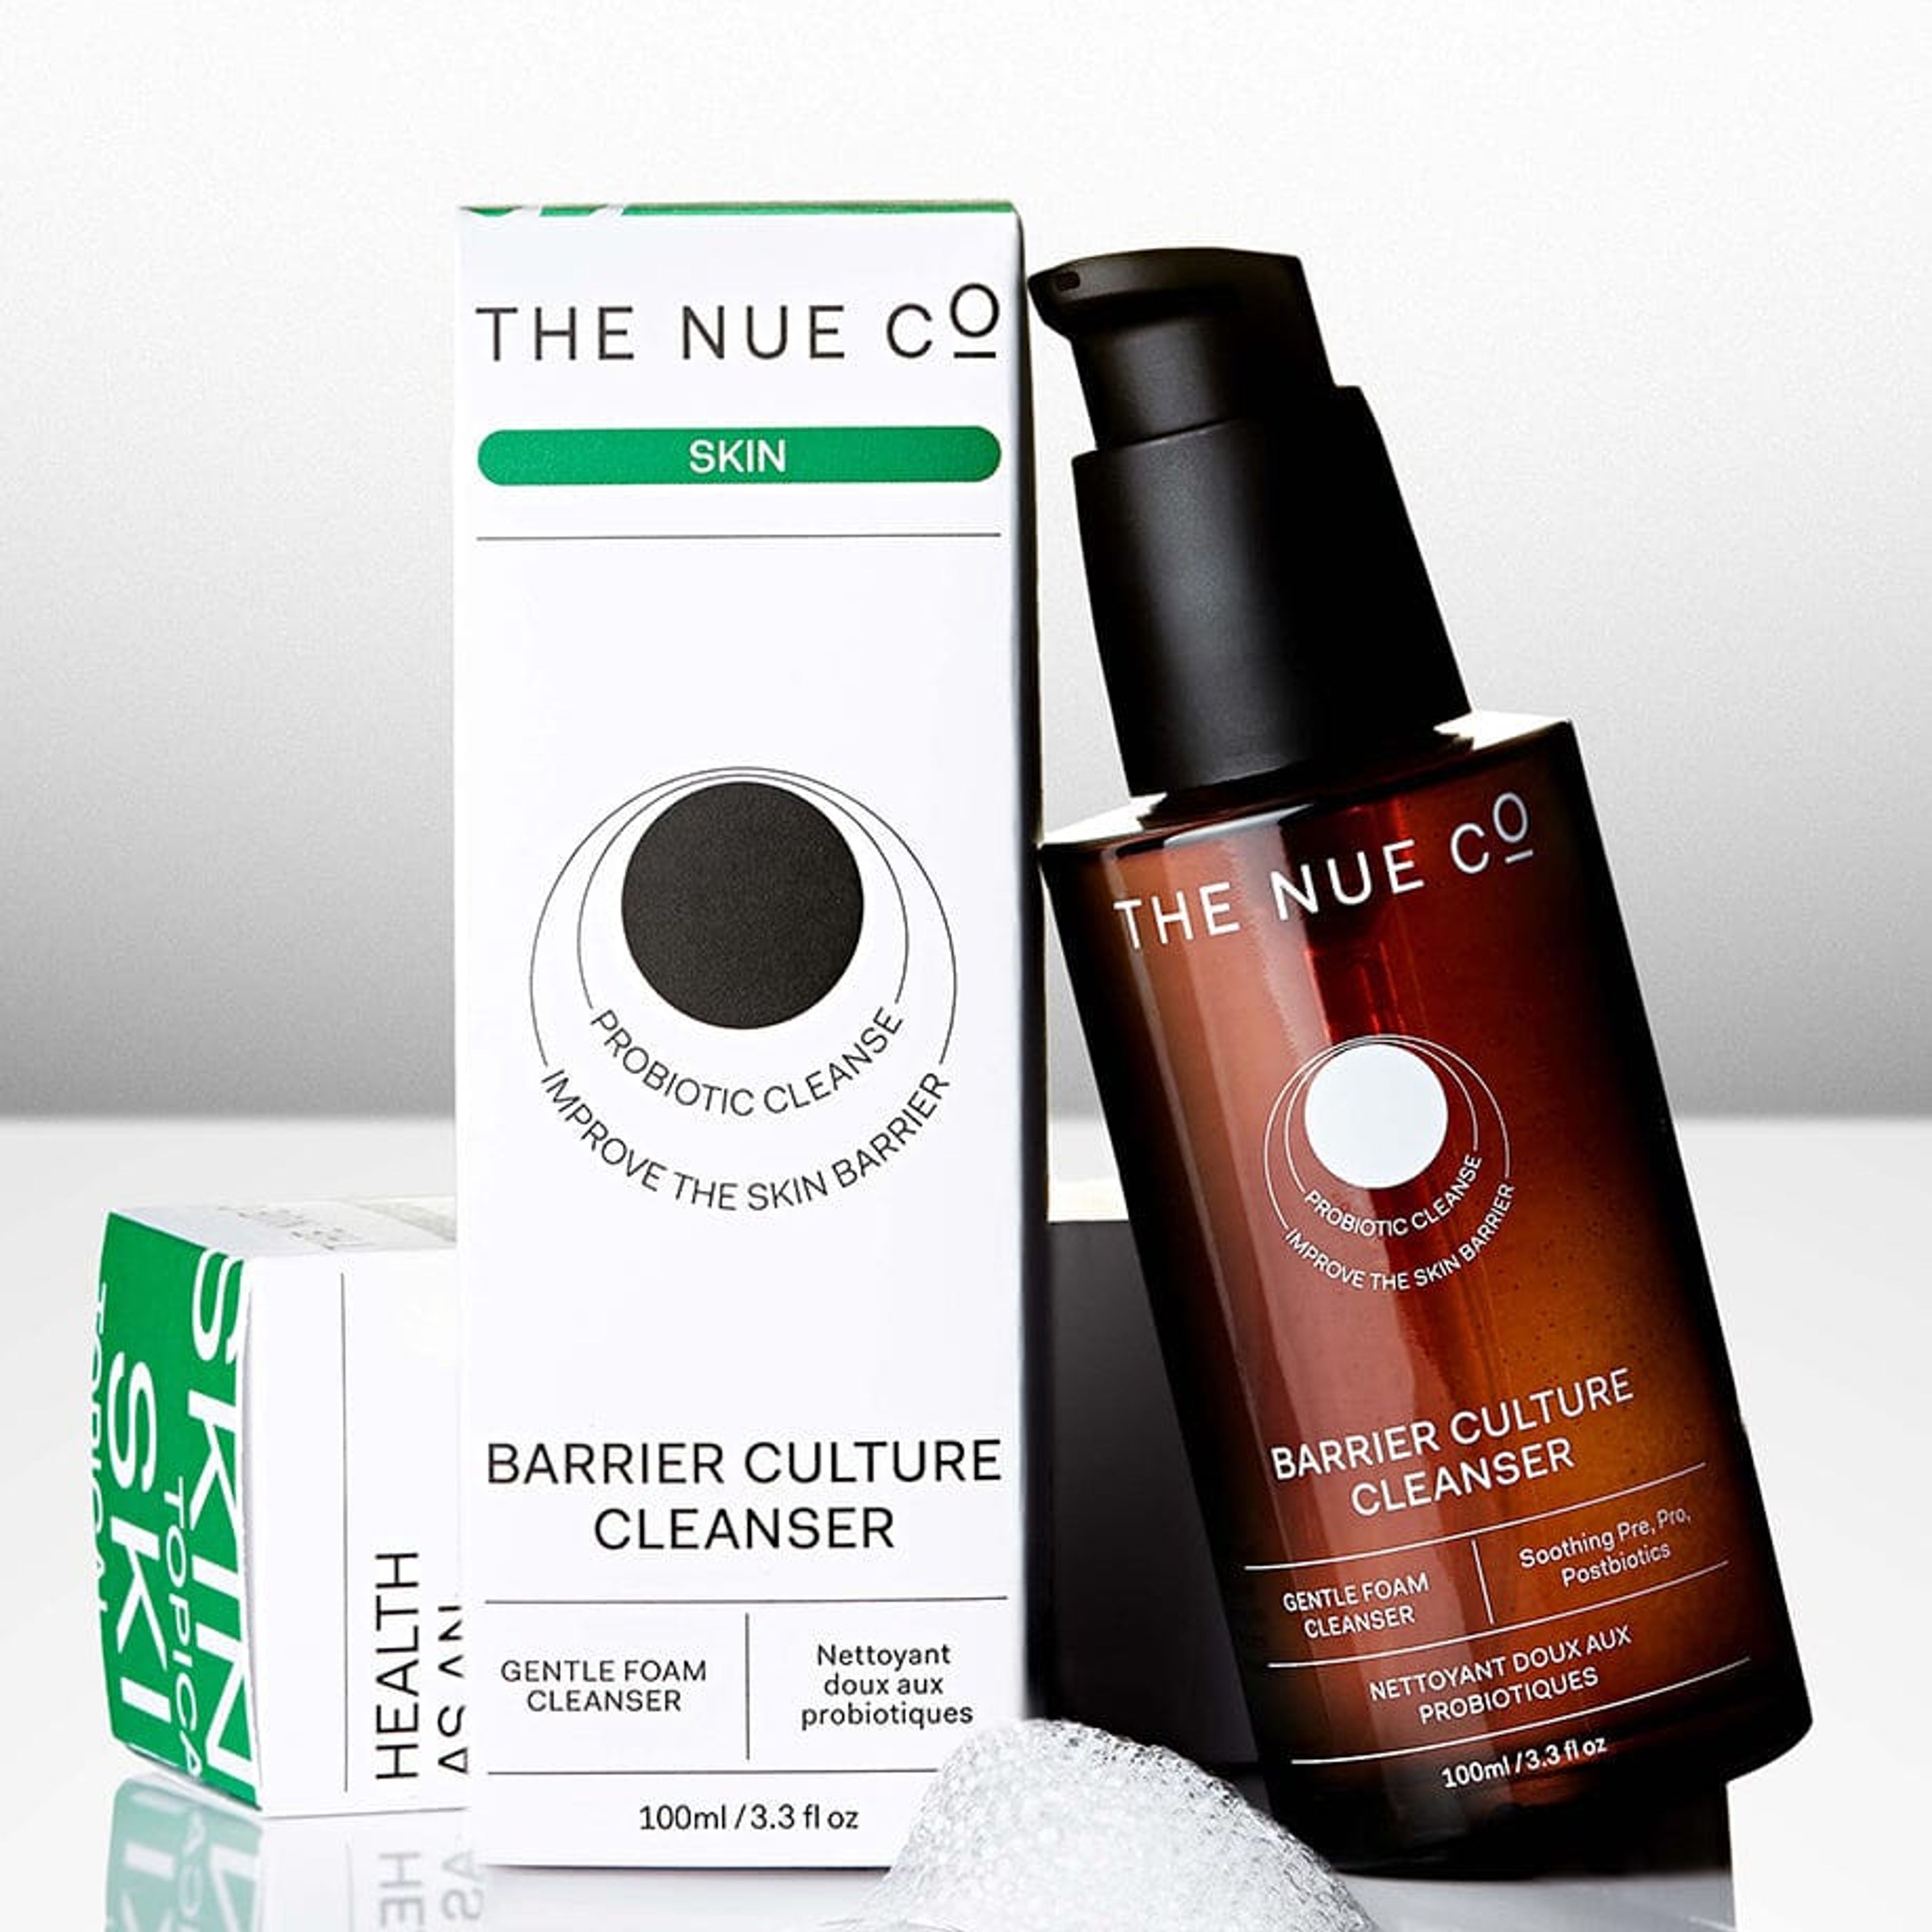 Barrier Culture Cleanser